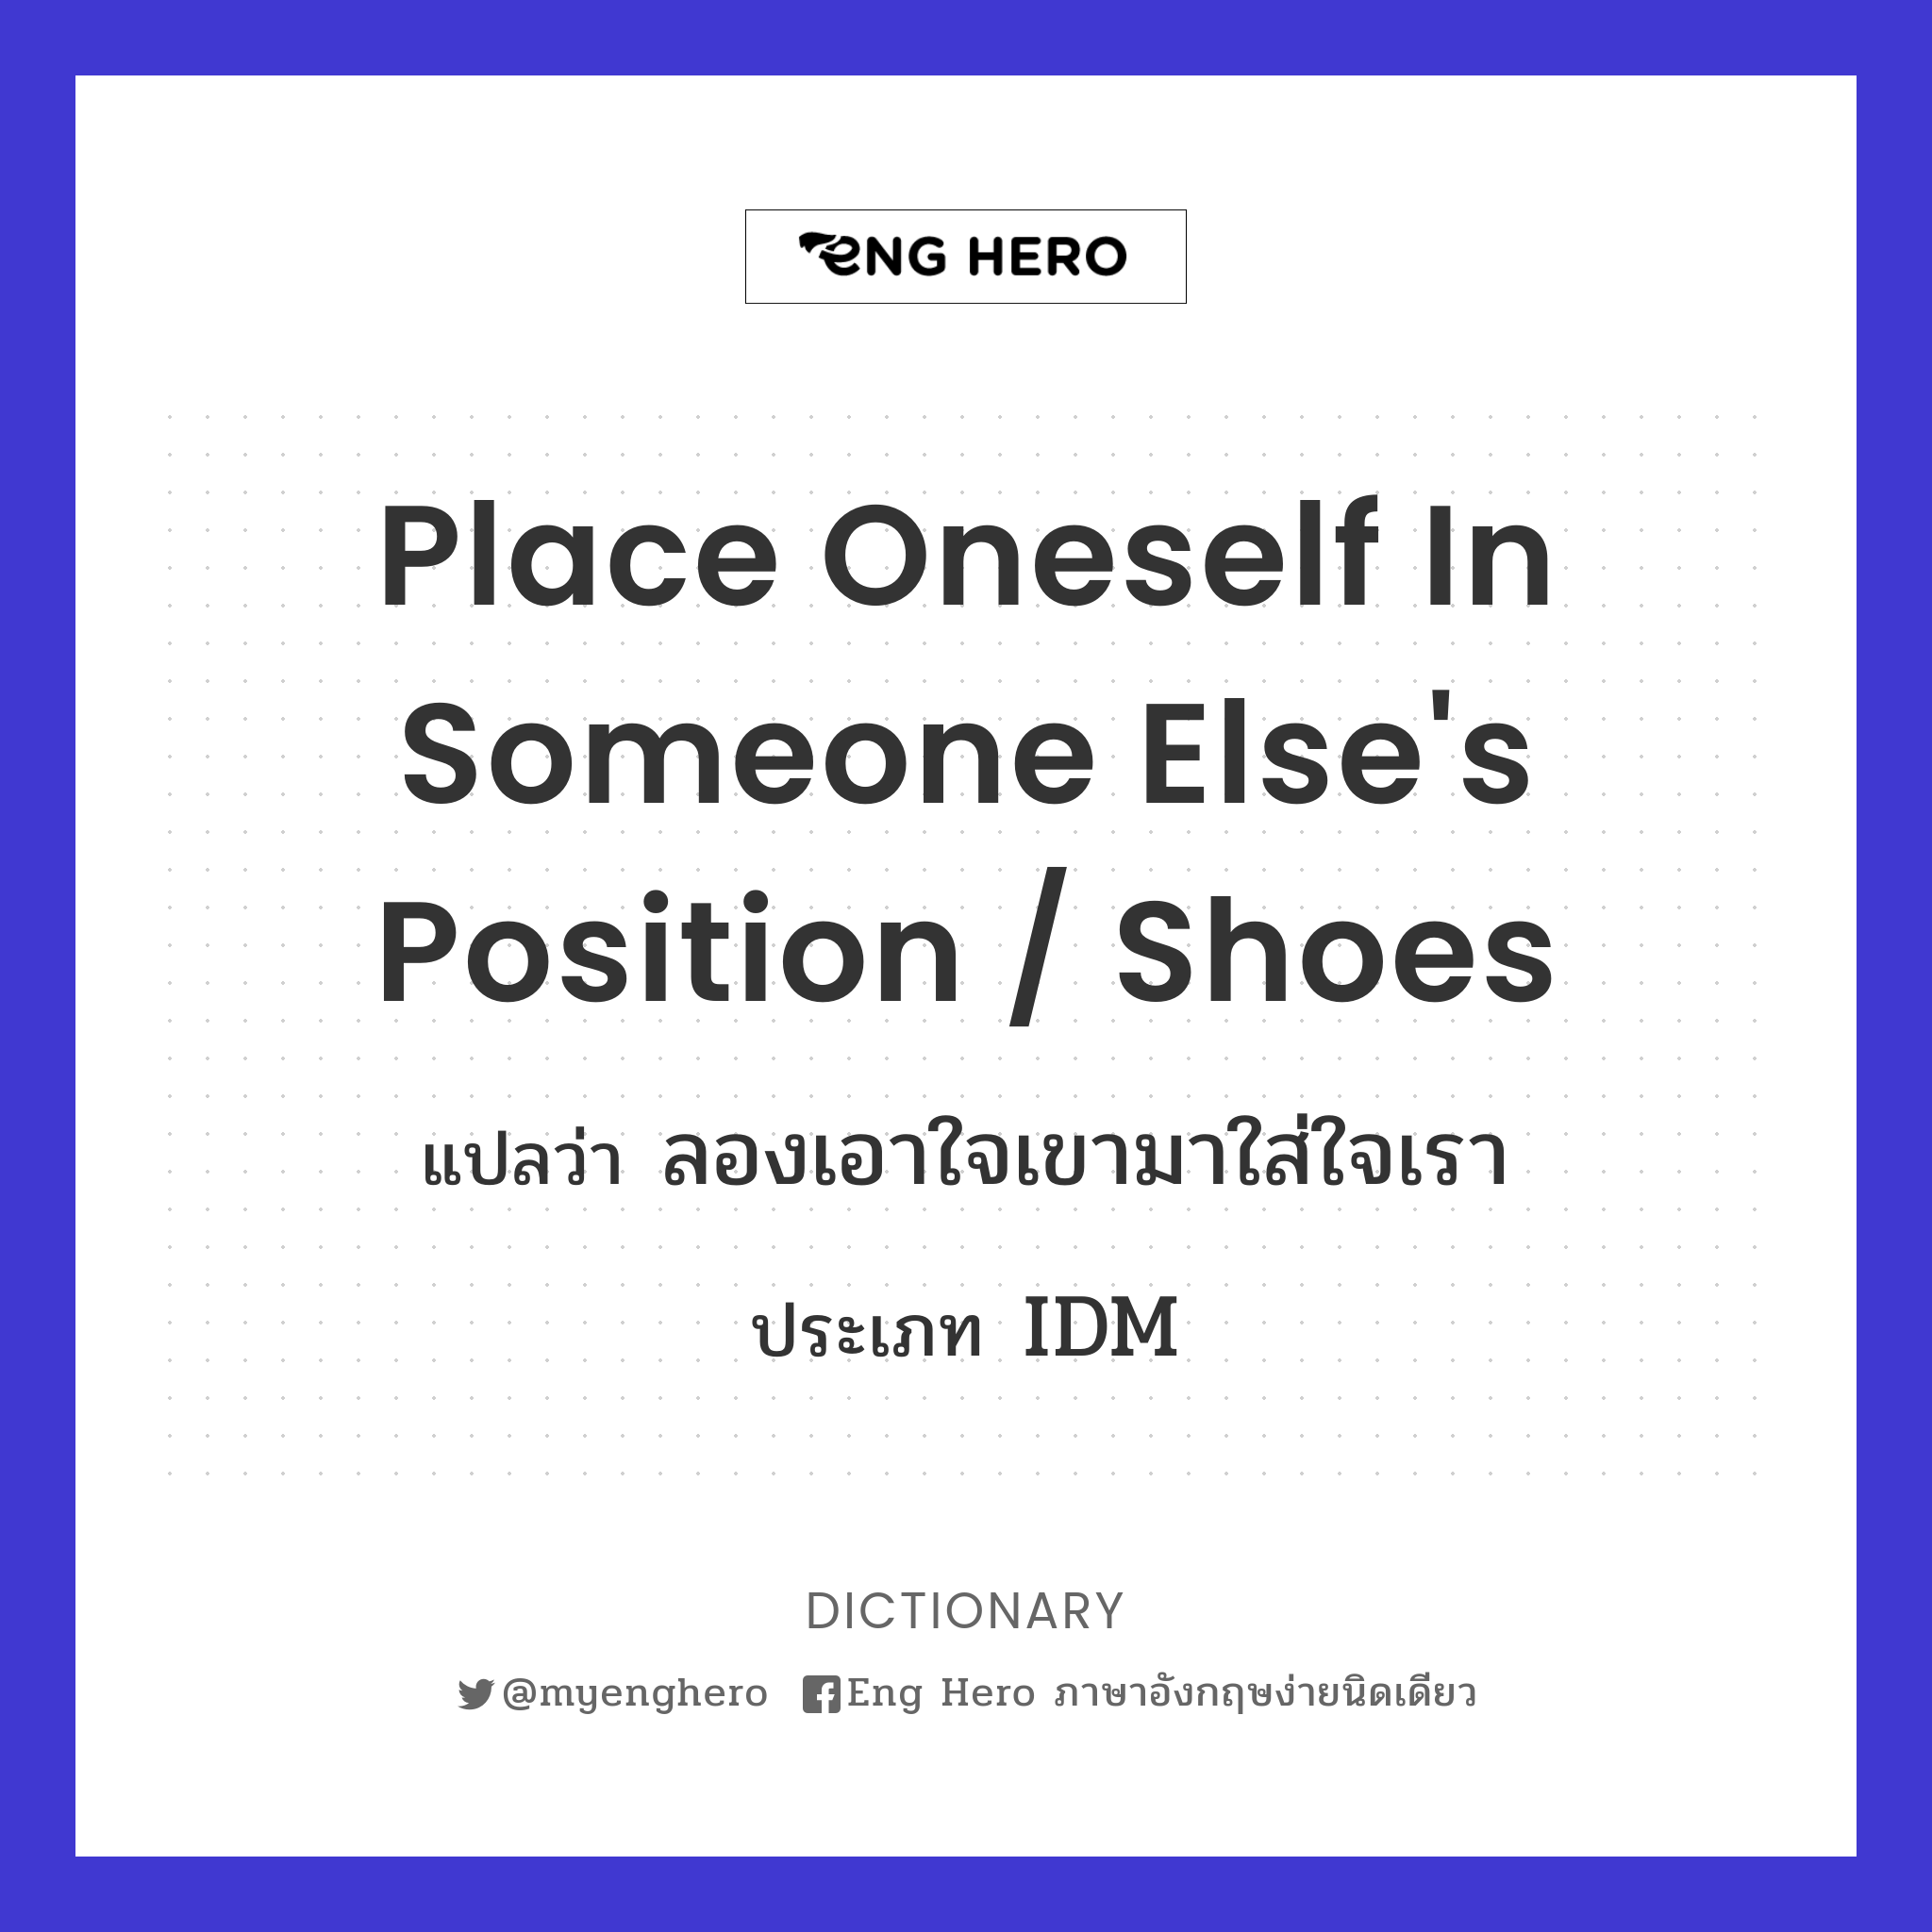 place oneself in someone else's position / shoes